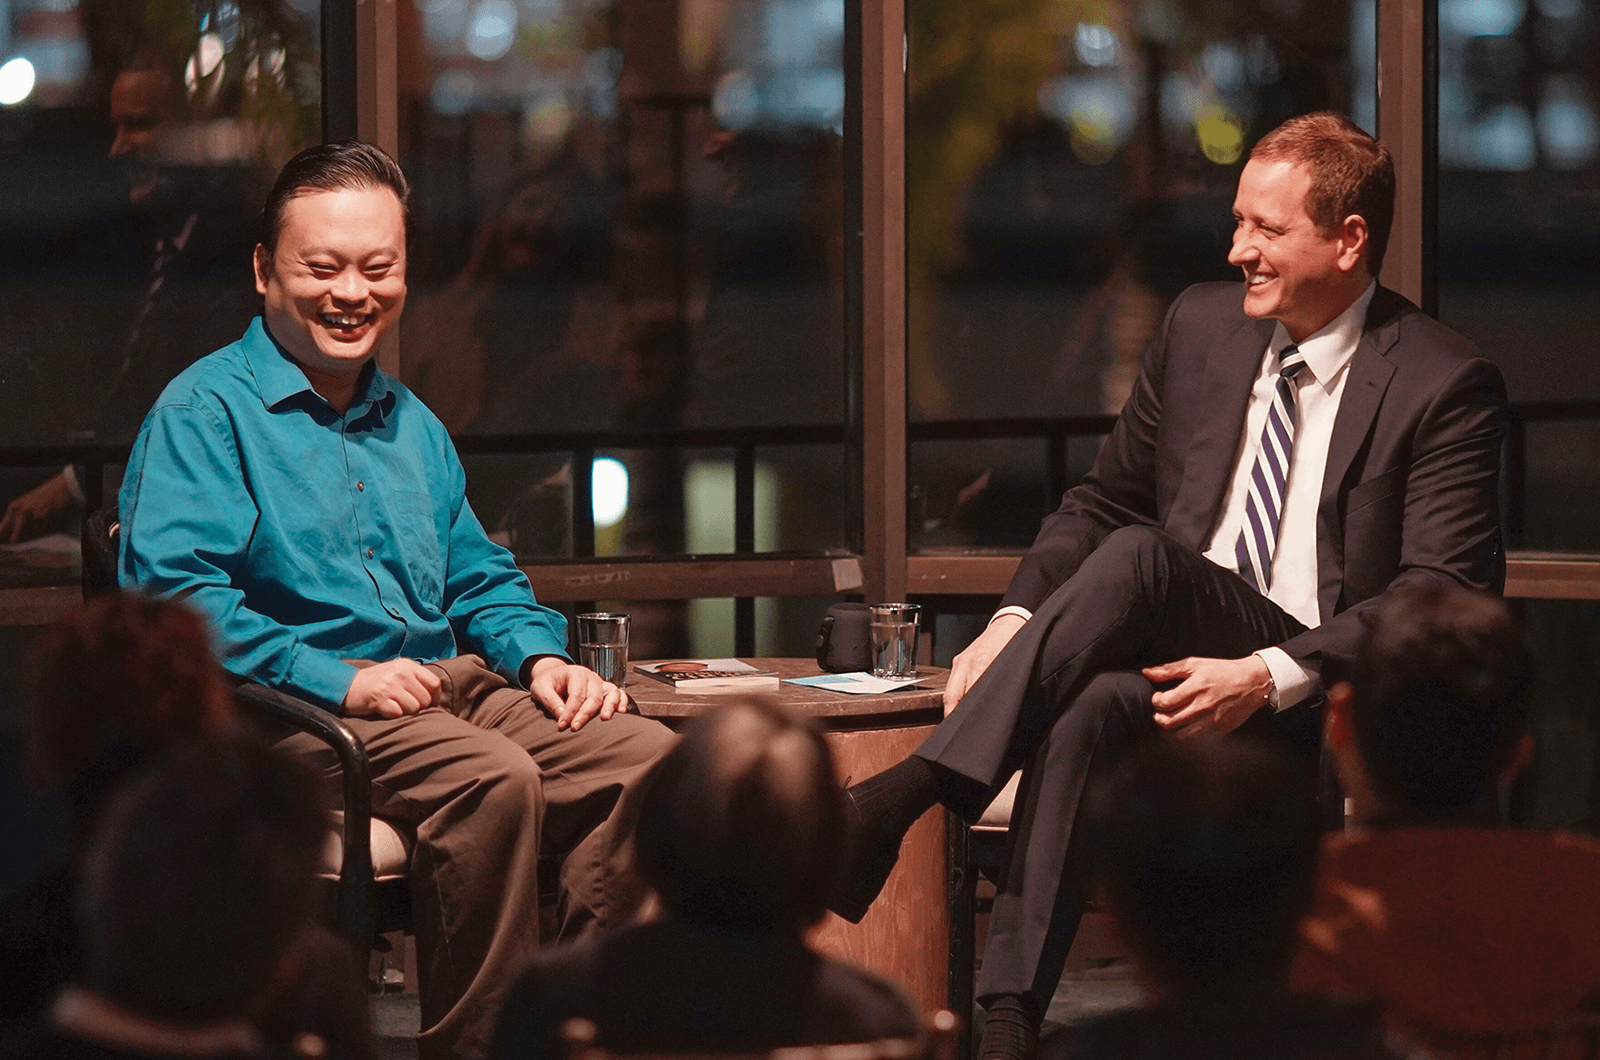 William Hung being interviewed by John Kerwin on TV set